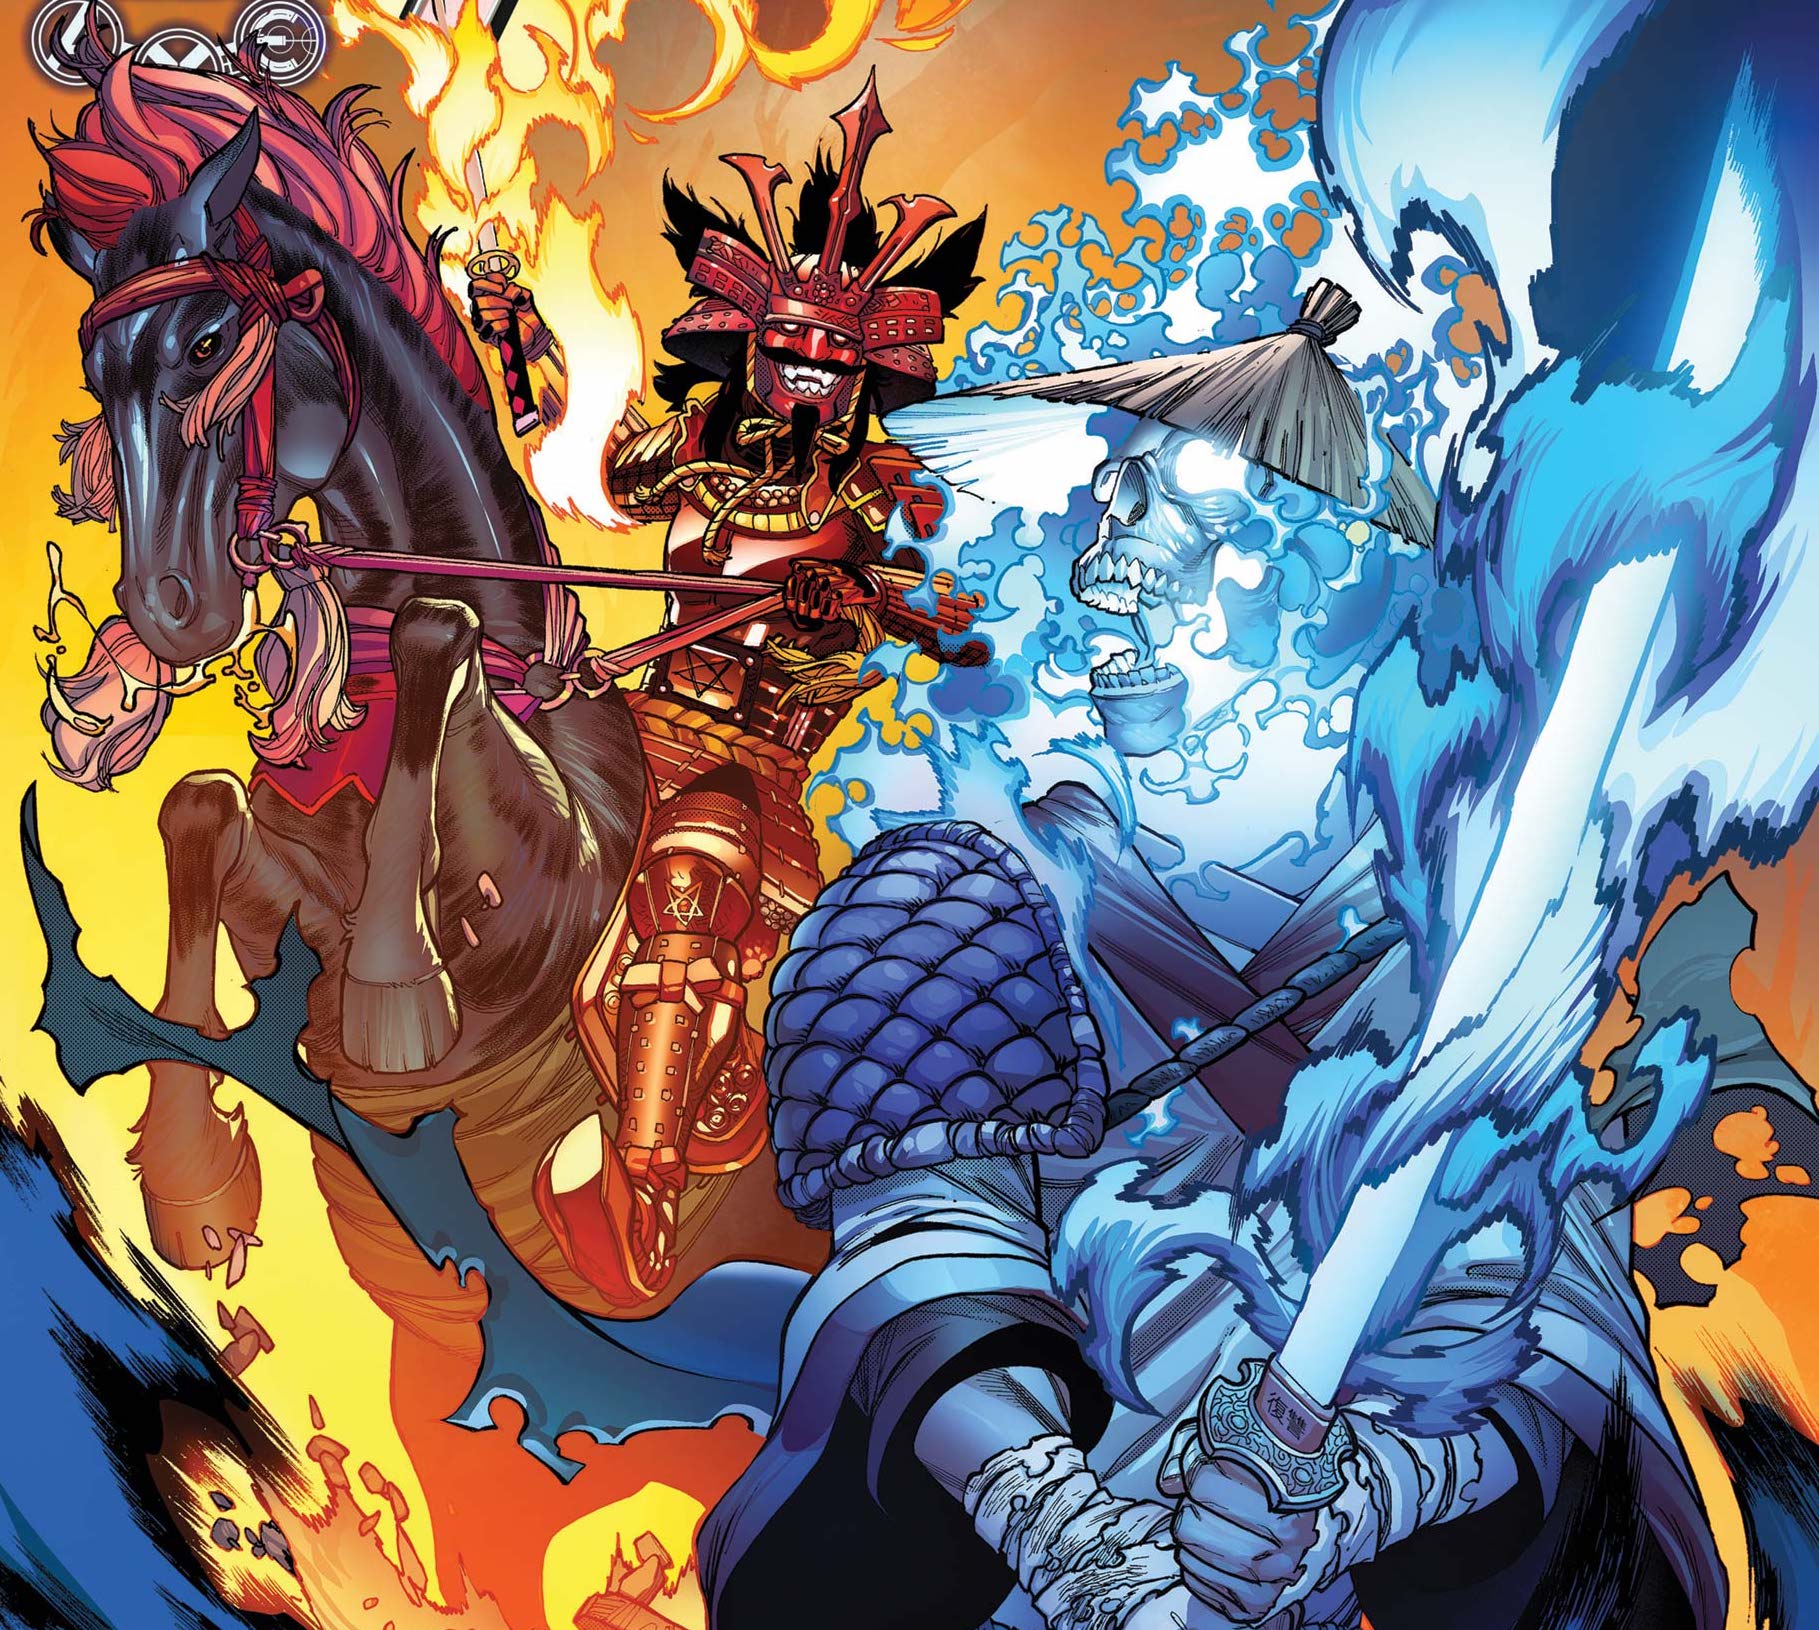 'The Avengers' #58 introduces your new favorite Ghost Rider